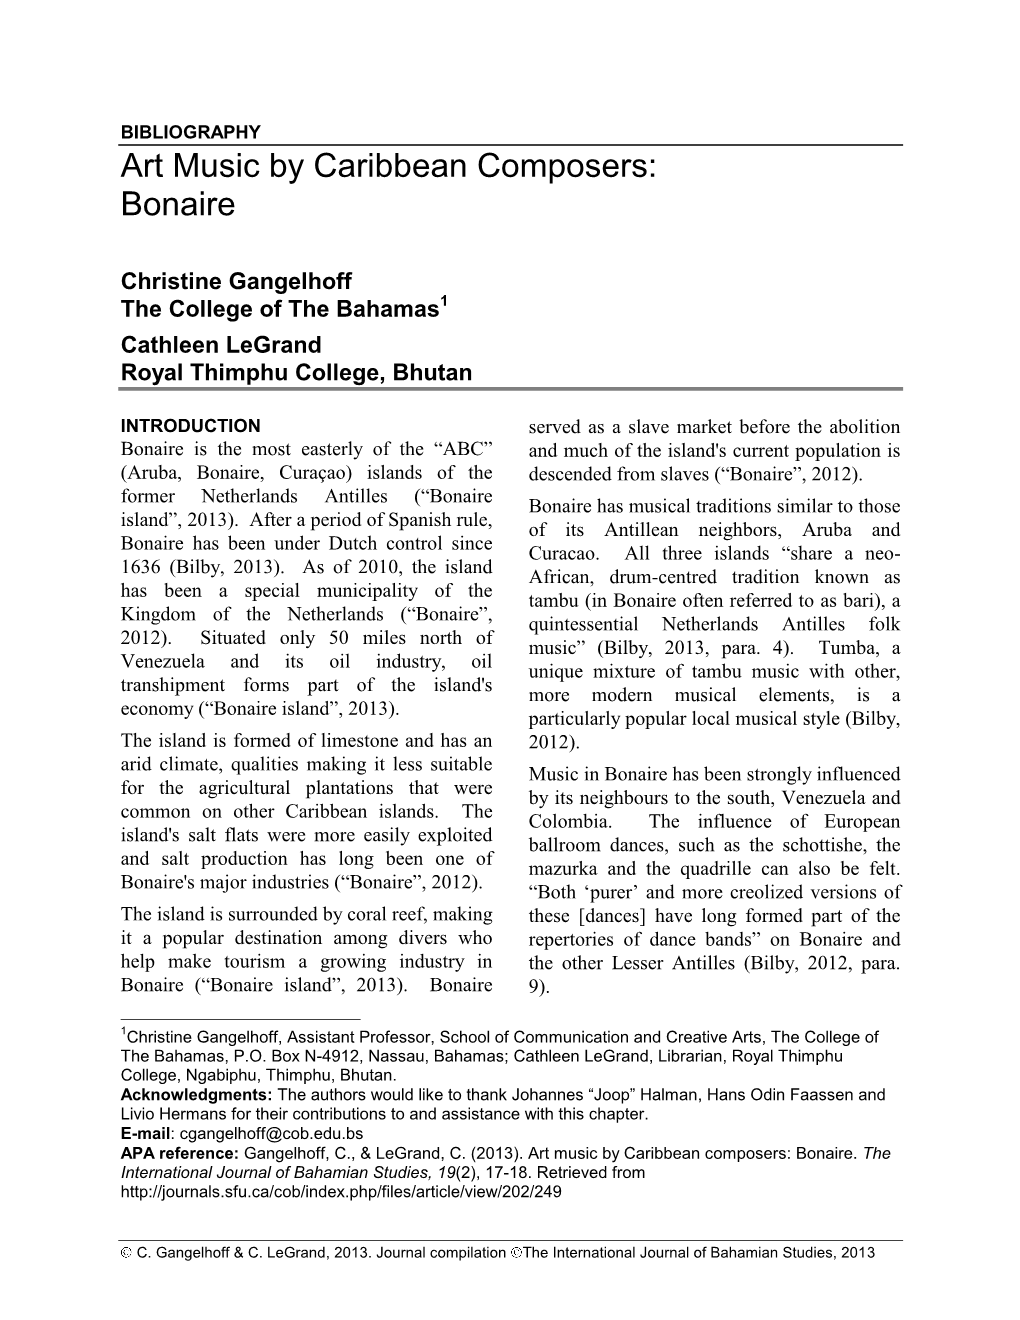 Art Music by Caribbean Composers: Bonaire